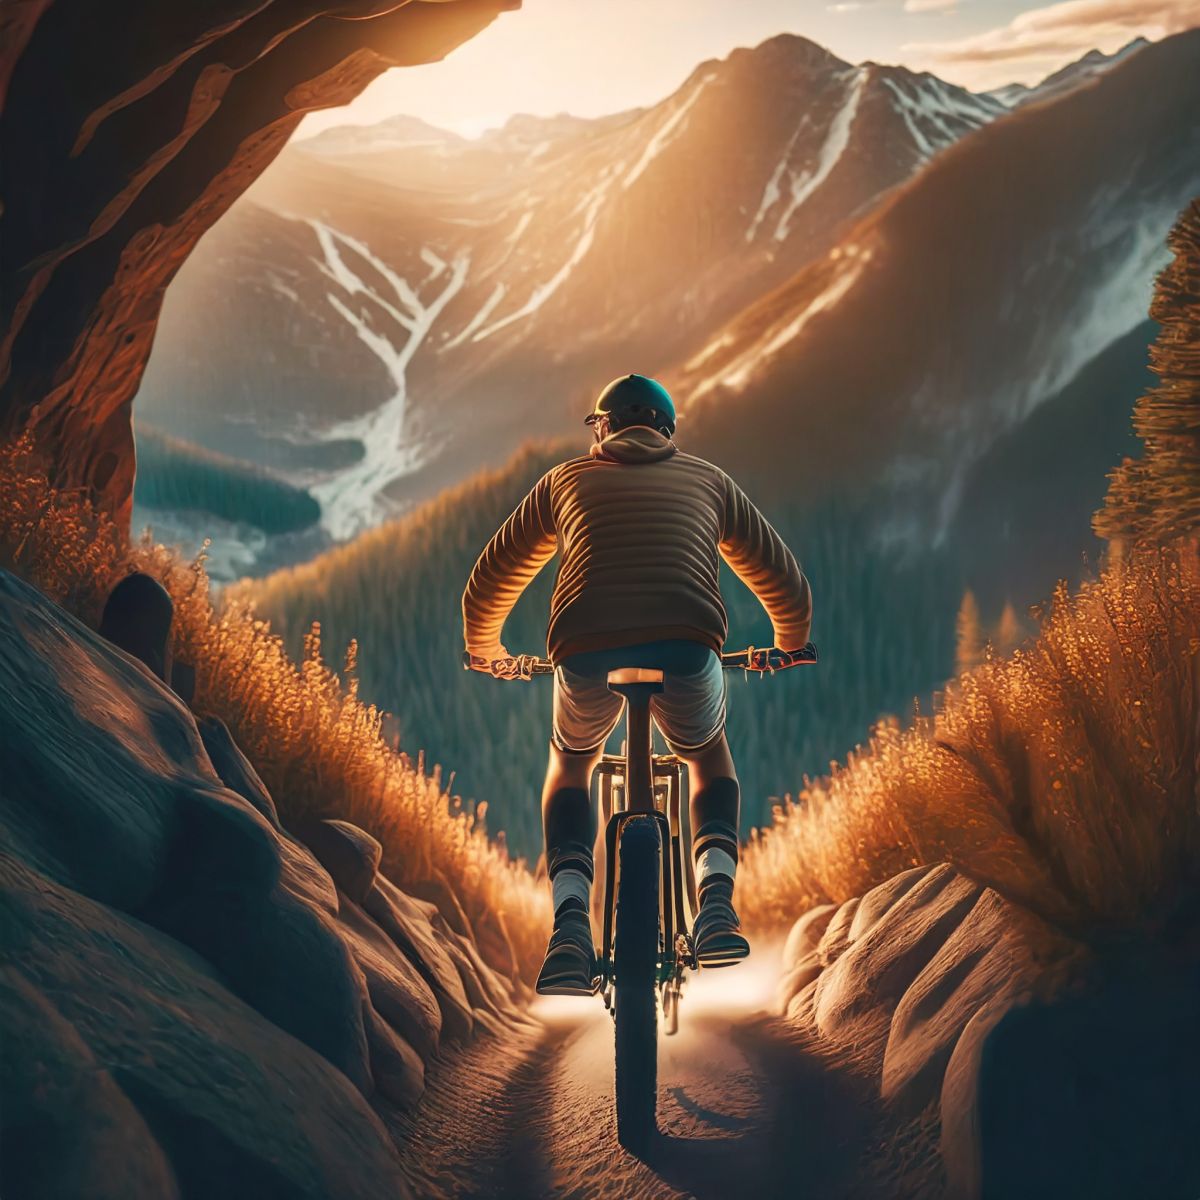 Josh Bach riding a mountain bike in the mountains of Colorado. Image created by Adobe Firefly.